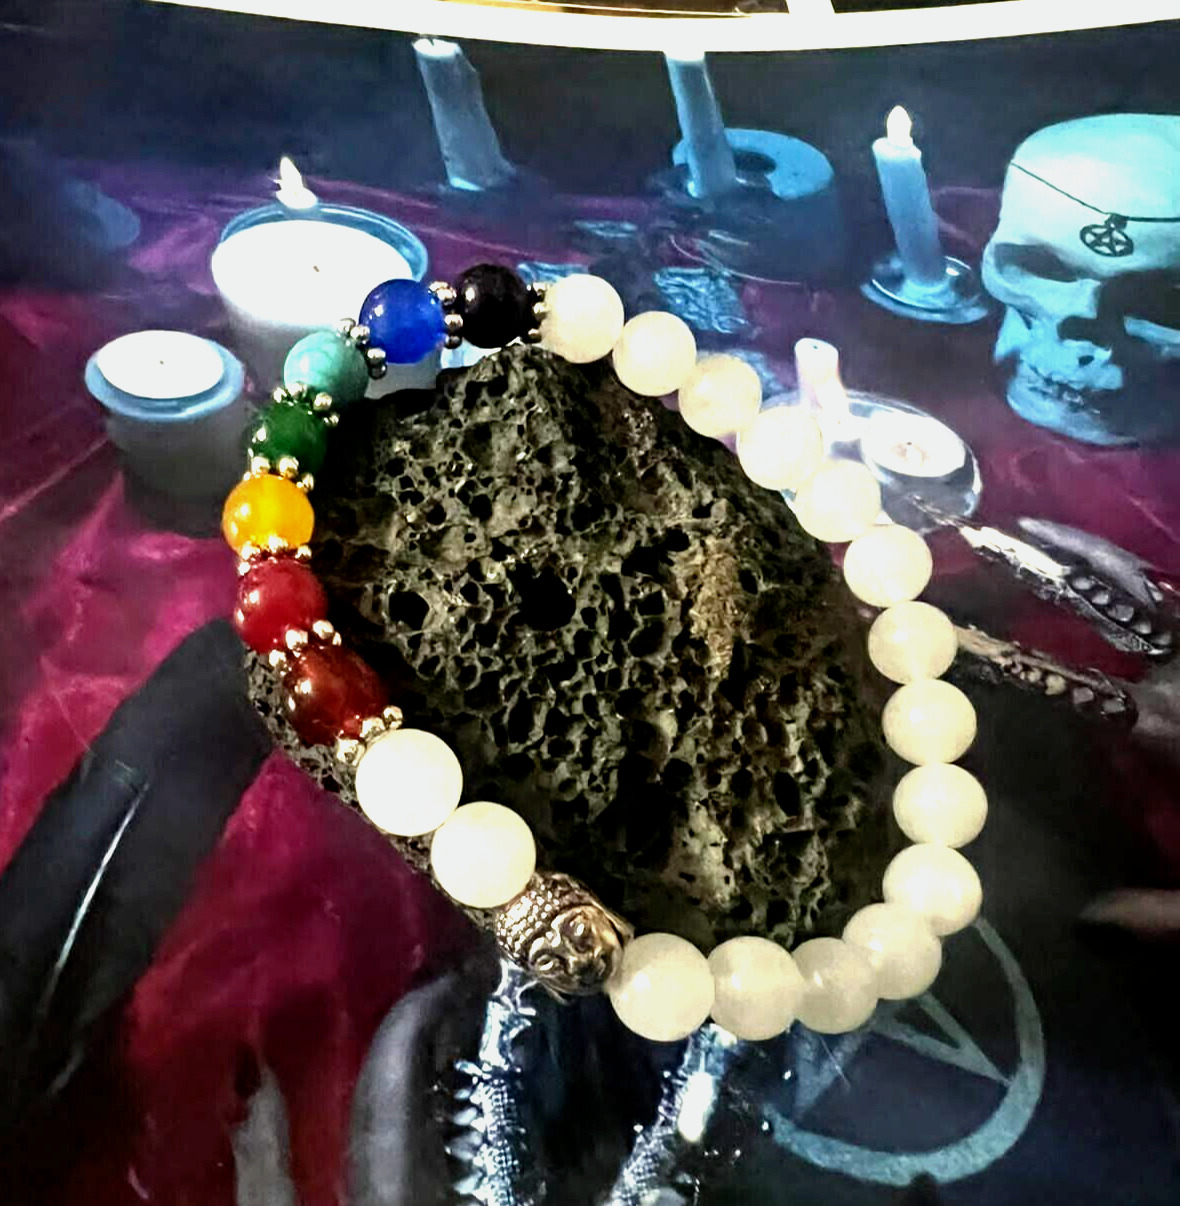 1000x Power Aghori Rudra Ashta Siddhi Bracelet - CREATE YOUR THOUGHTS TO REALITY